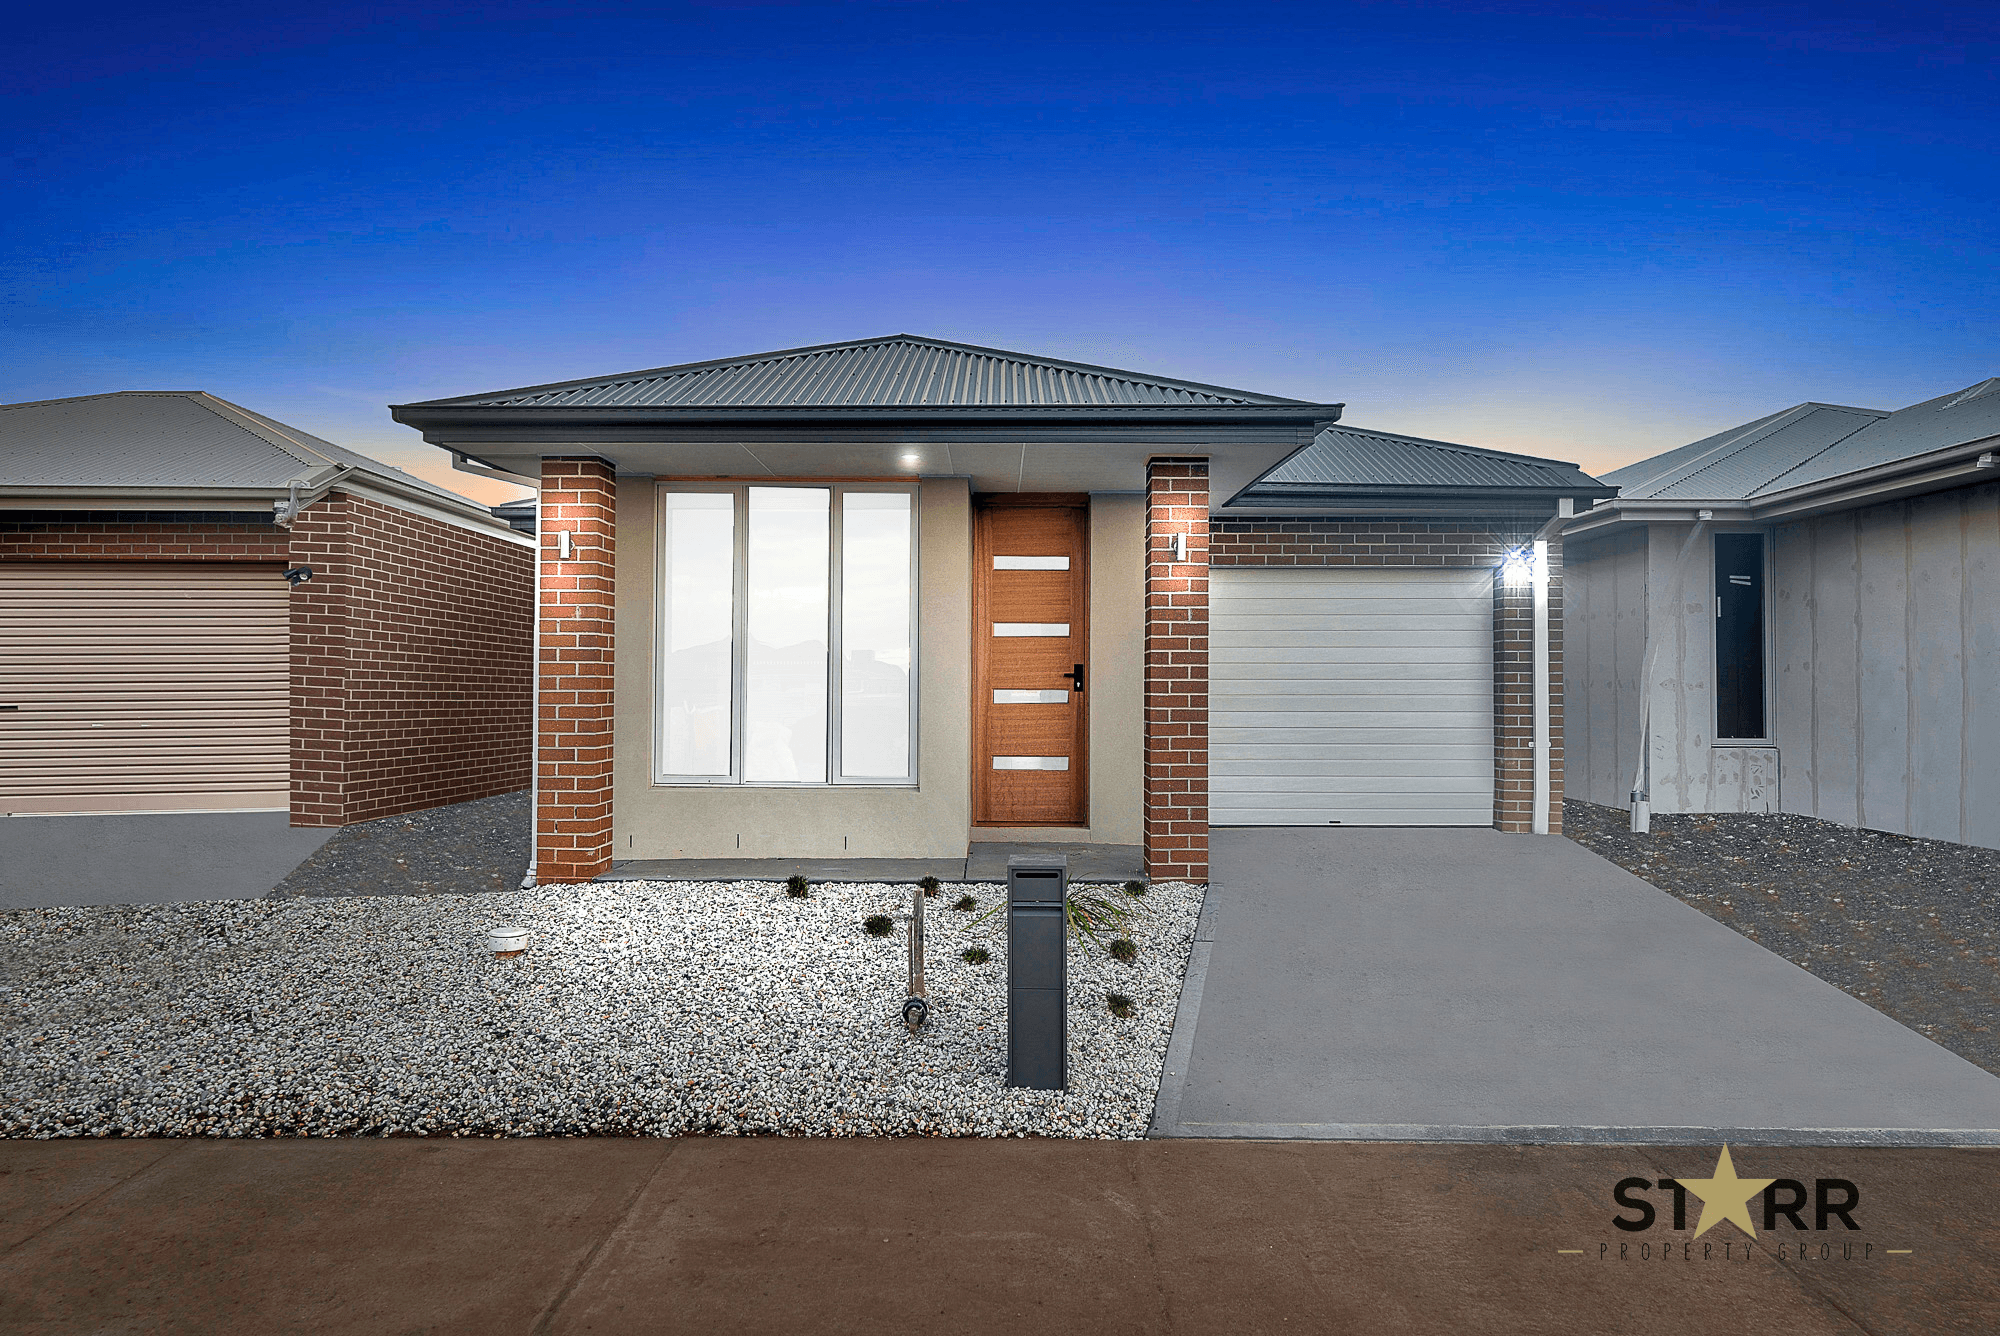 11 Hector Street, FRASER RISE, VIC 3336